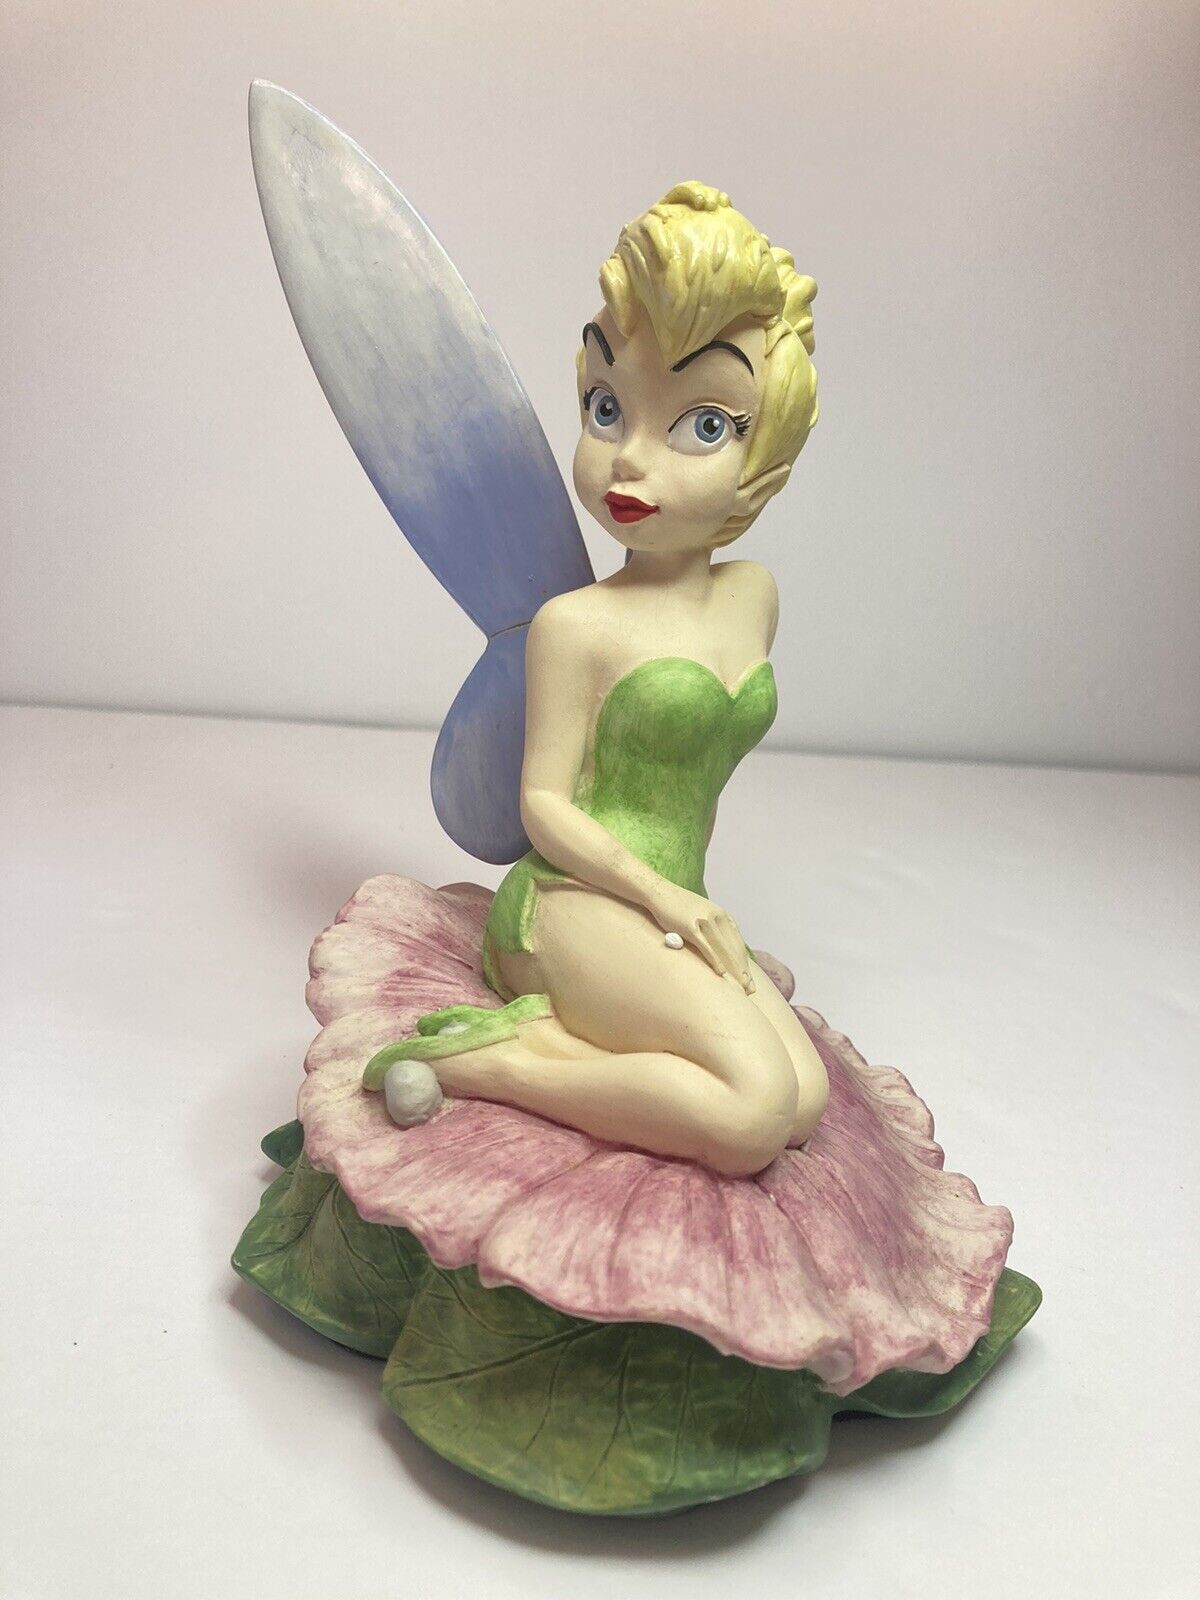 Vintage Tinkerbell Disney Store Resin Figurine Neverland Box Follow Your Dreams